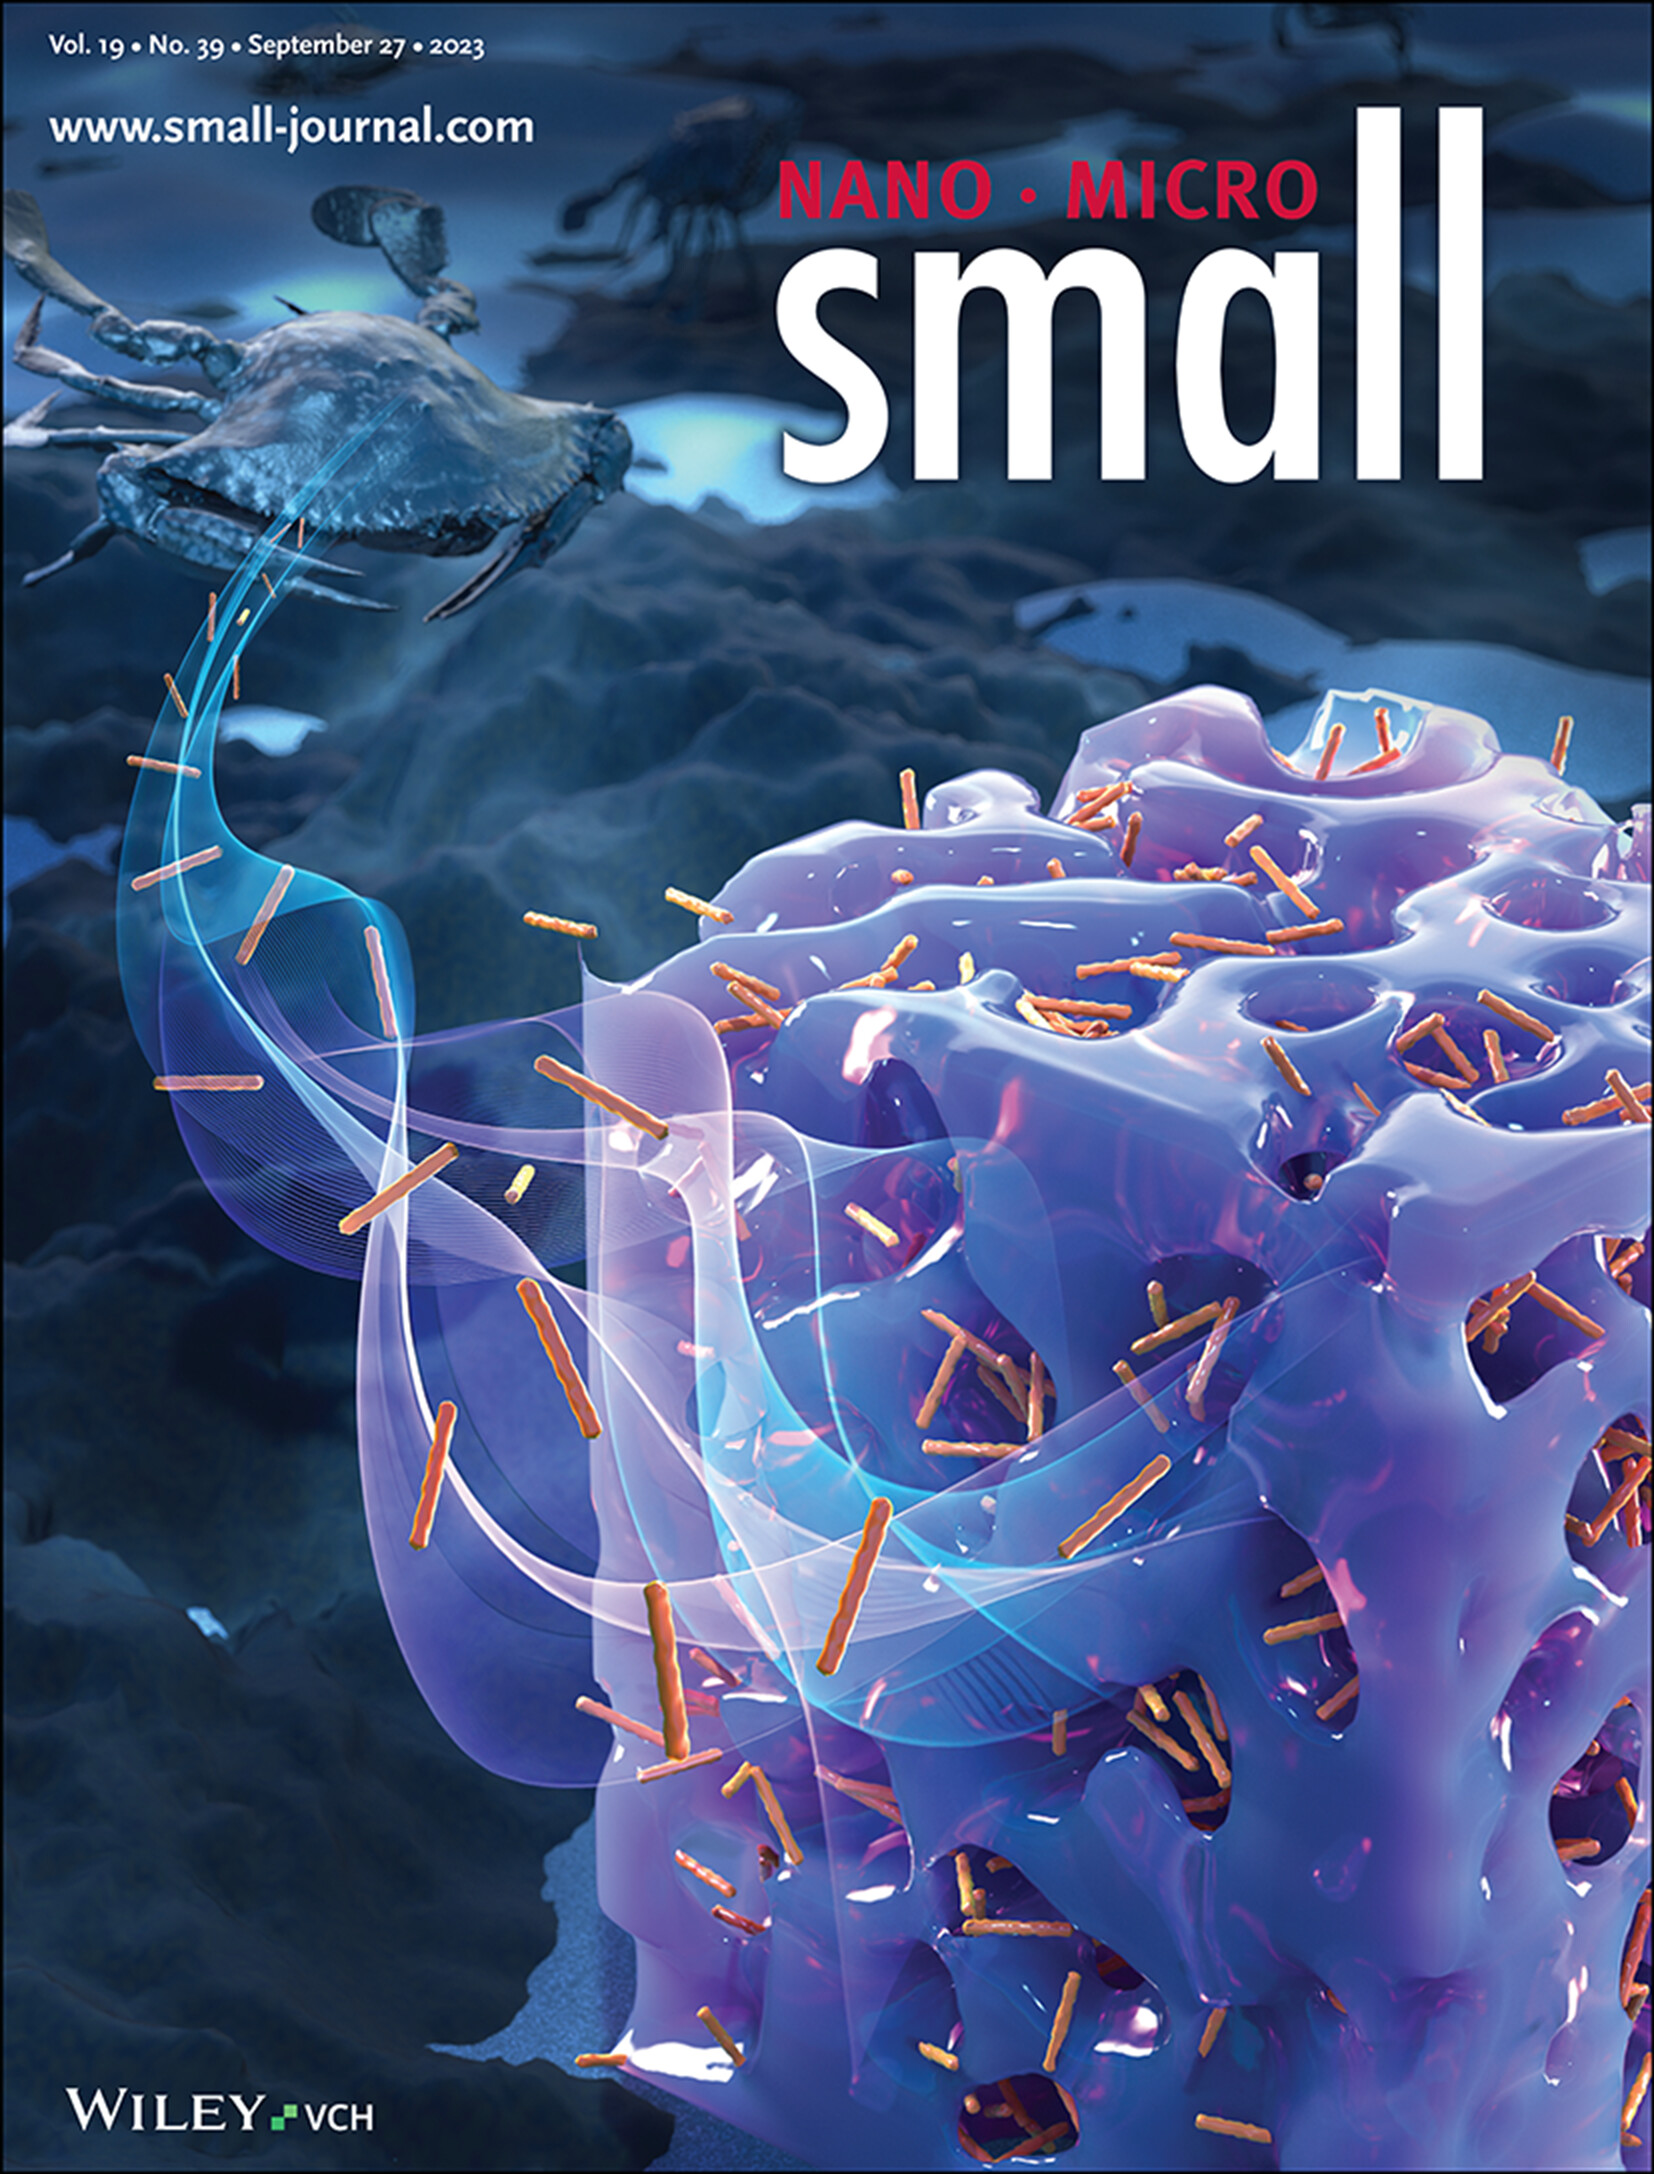 The cover of the September 27 2023 edition of Nano Micro Small